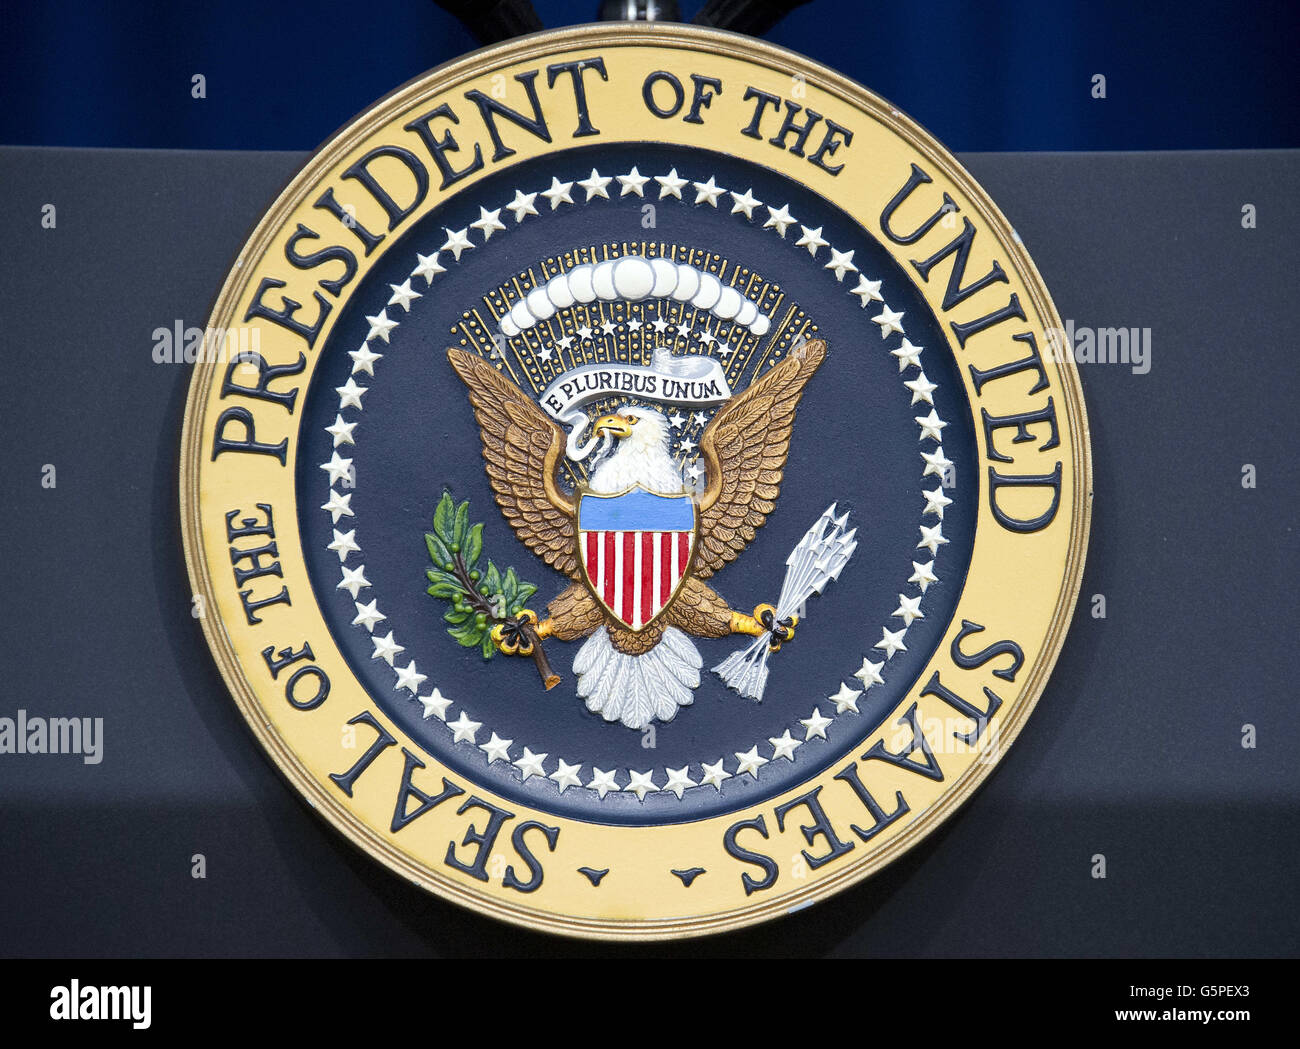 Washington, District of Columbia, USA. 22nd June, 2016. Seal of the President of the United States on the front of the podium in the South Court Auditorium of the White House in Washington, DC on Wednesday, June 22, 2016. Credit: Ron Sachs/CNP © Ron Sachs/CNP/ZUMA Wire/Alamy Live News Stock Photo